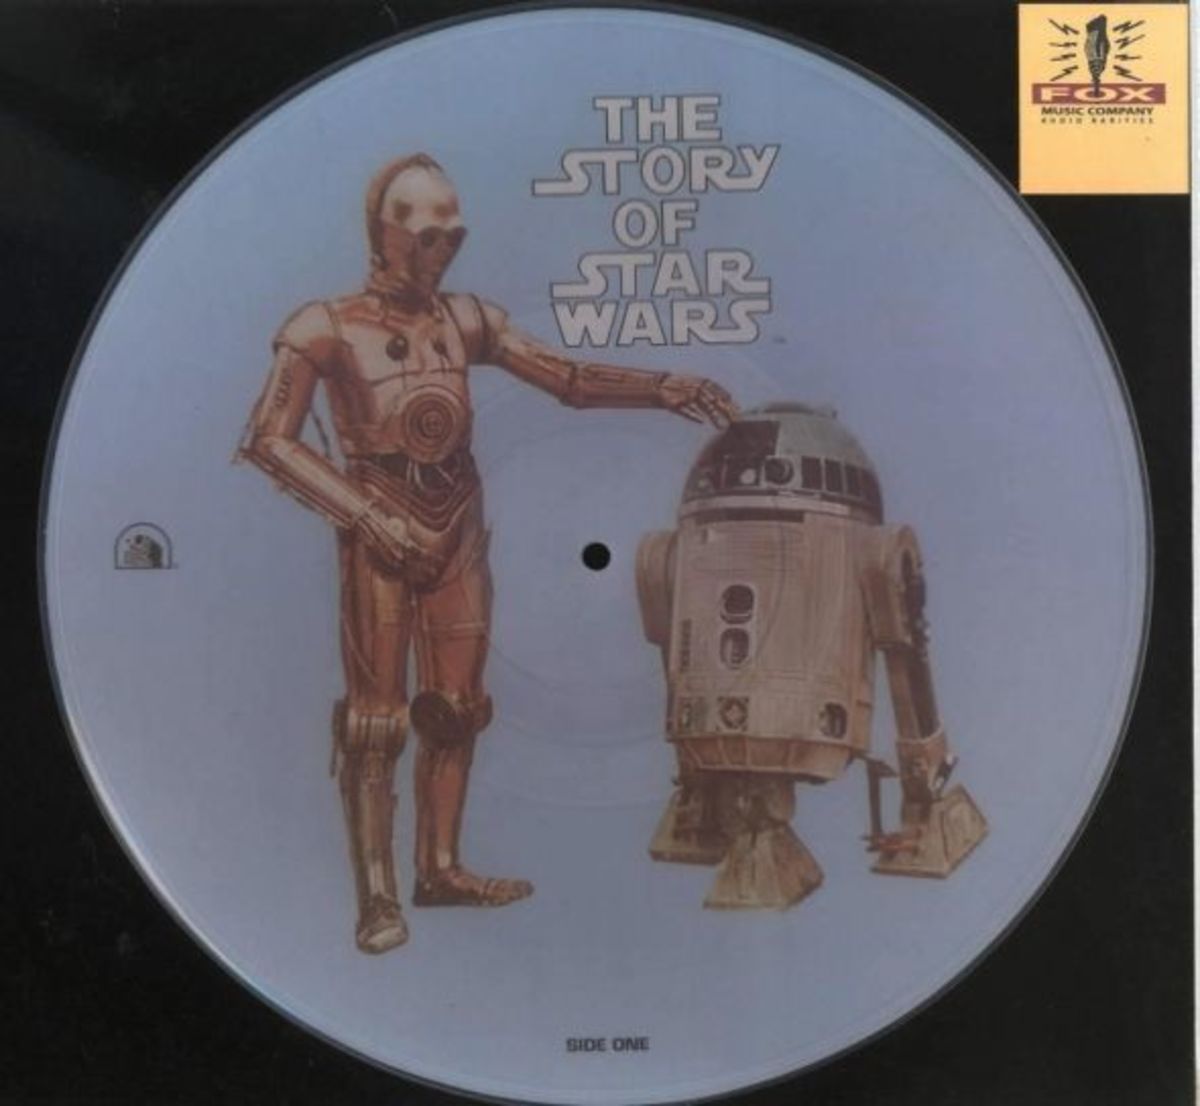 Star Wars  "The Story of Star Wars" 20th Century Fox Records PR 103 12" Vinyl Picture Disc (1972) R2D2 C3PO Side 1